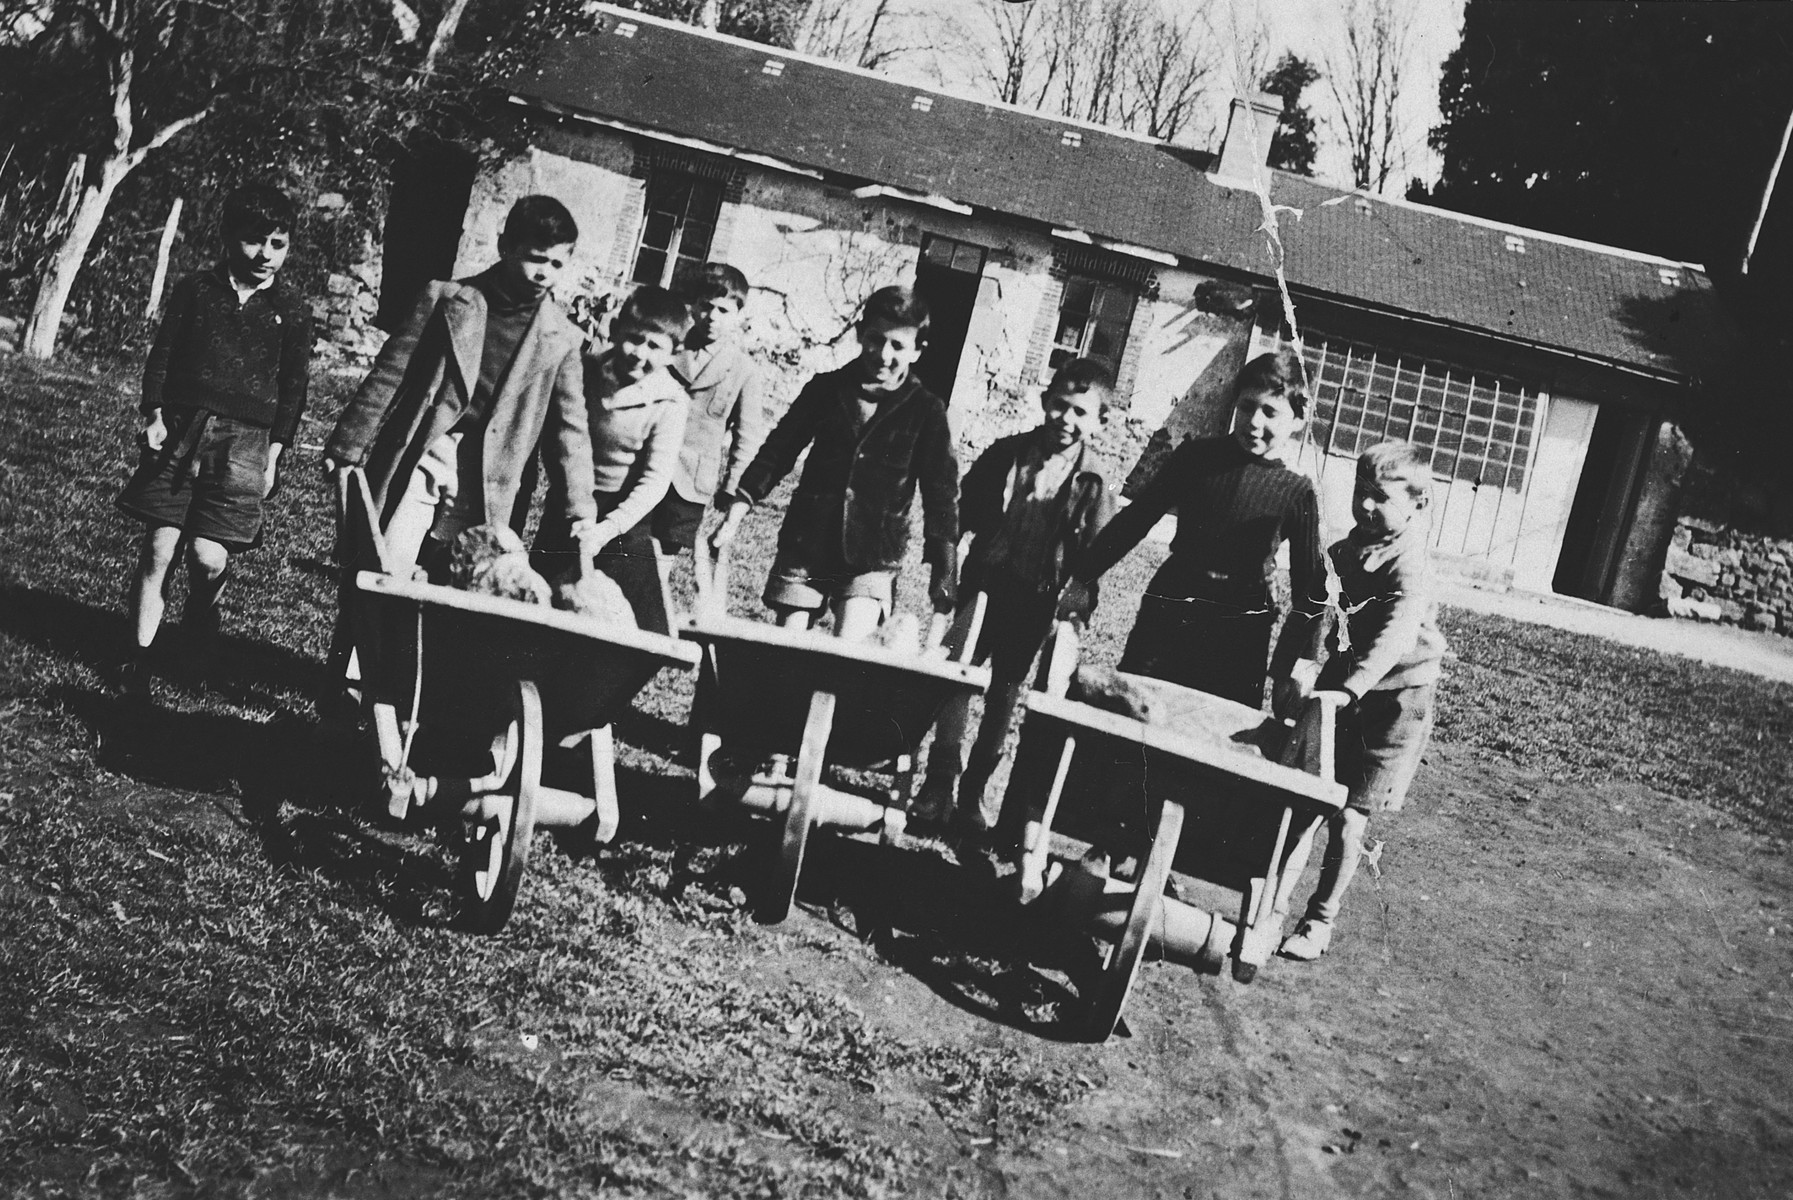 A group of children pushes wheelbarrows on the grounds of the Masgelier children's home in France.

Among those pictured is Israel Lichtenstein.